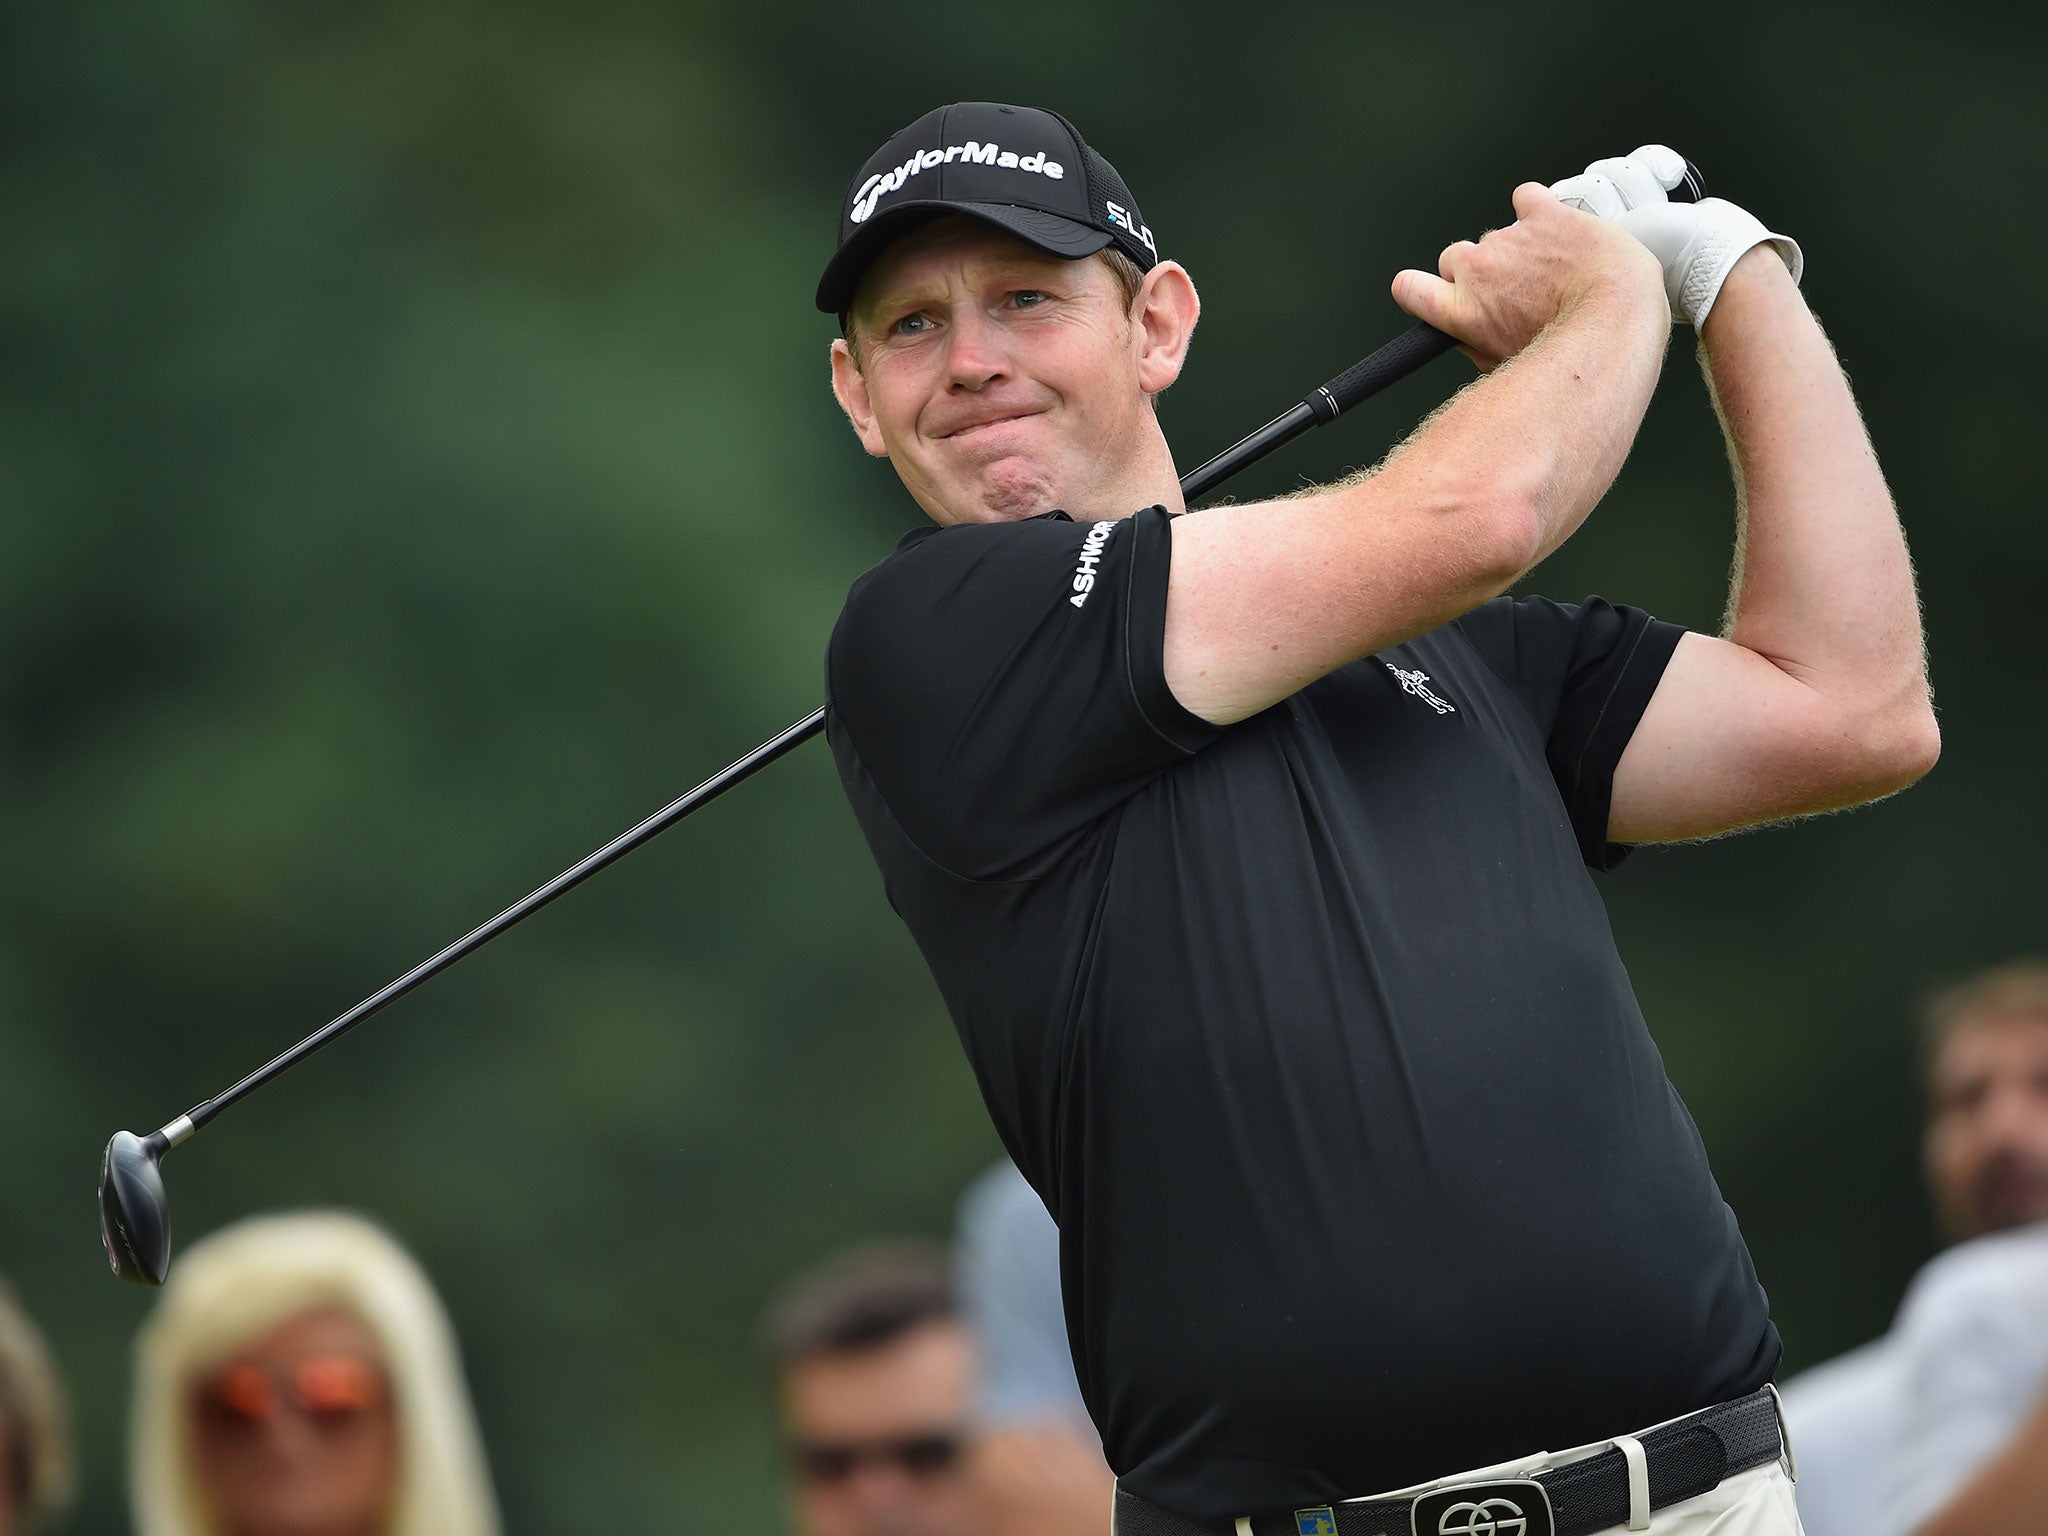 Stephen Gallacher plays a shot during his final round at the Turin Open on Sunday